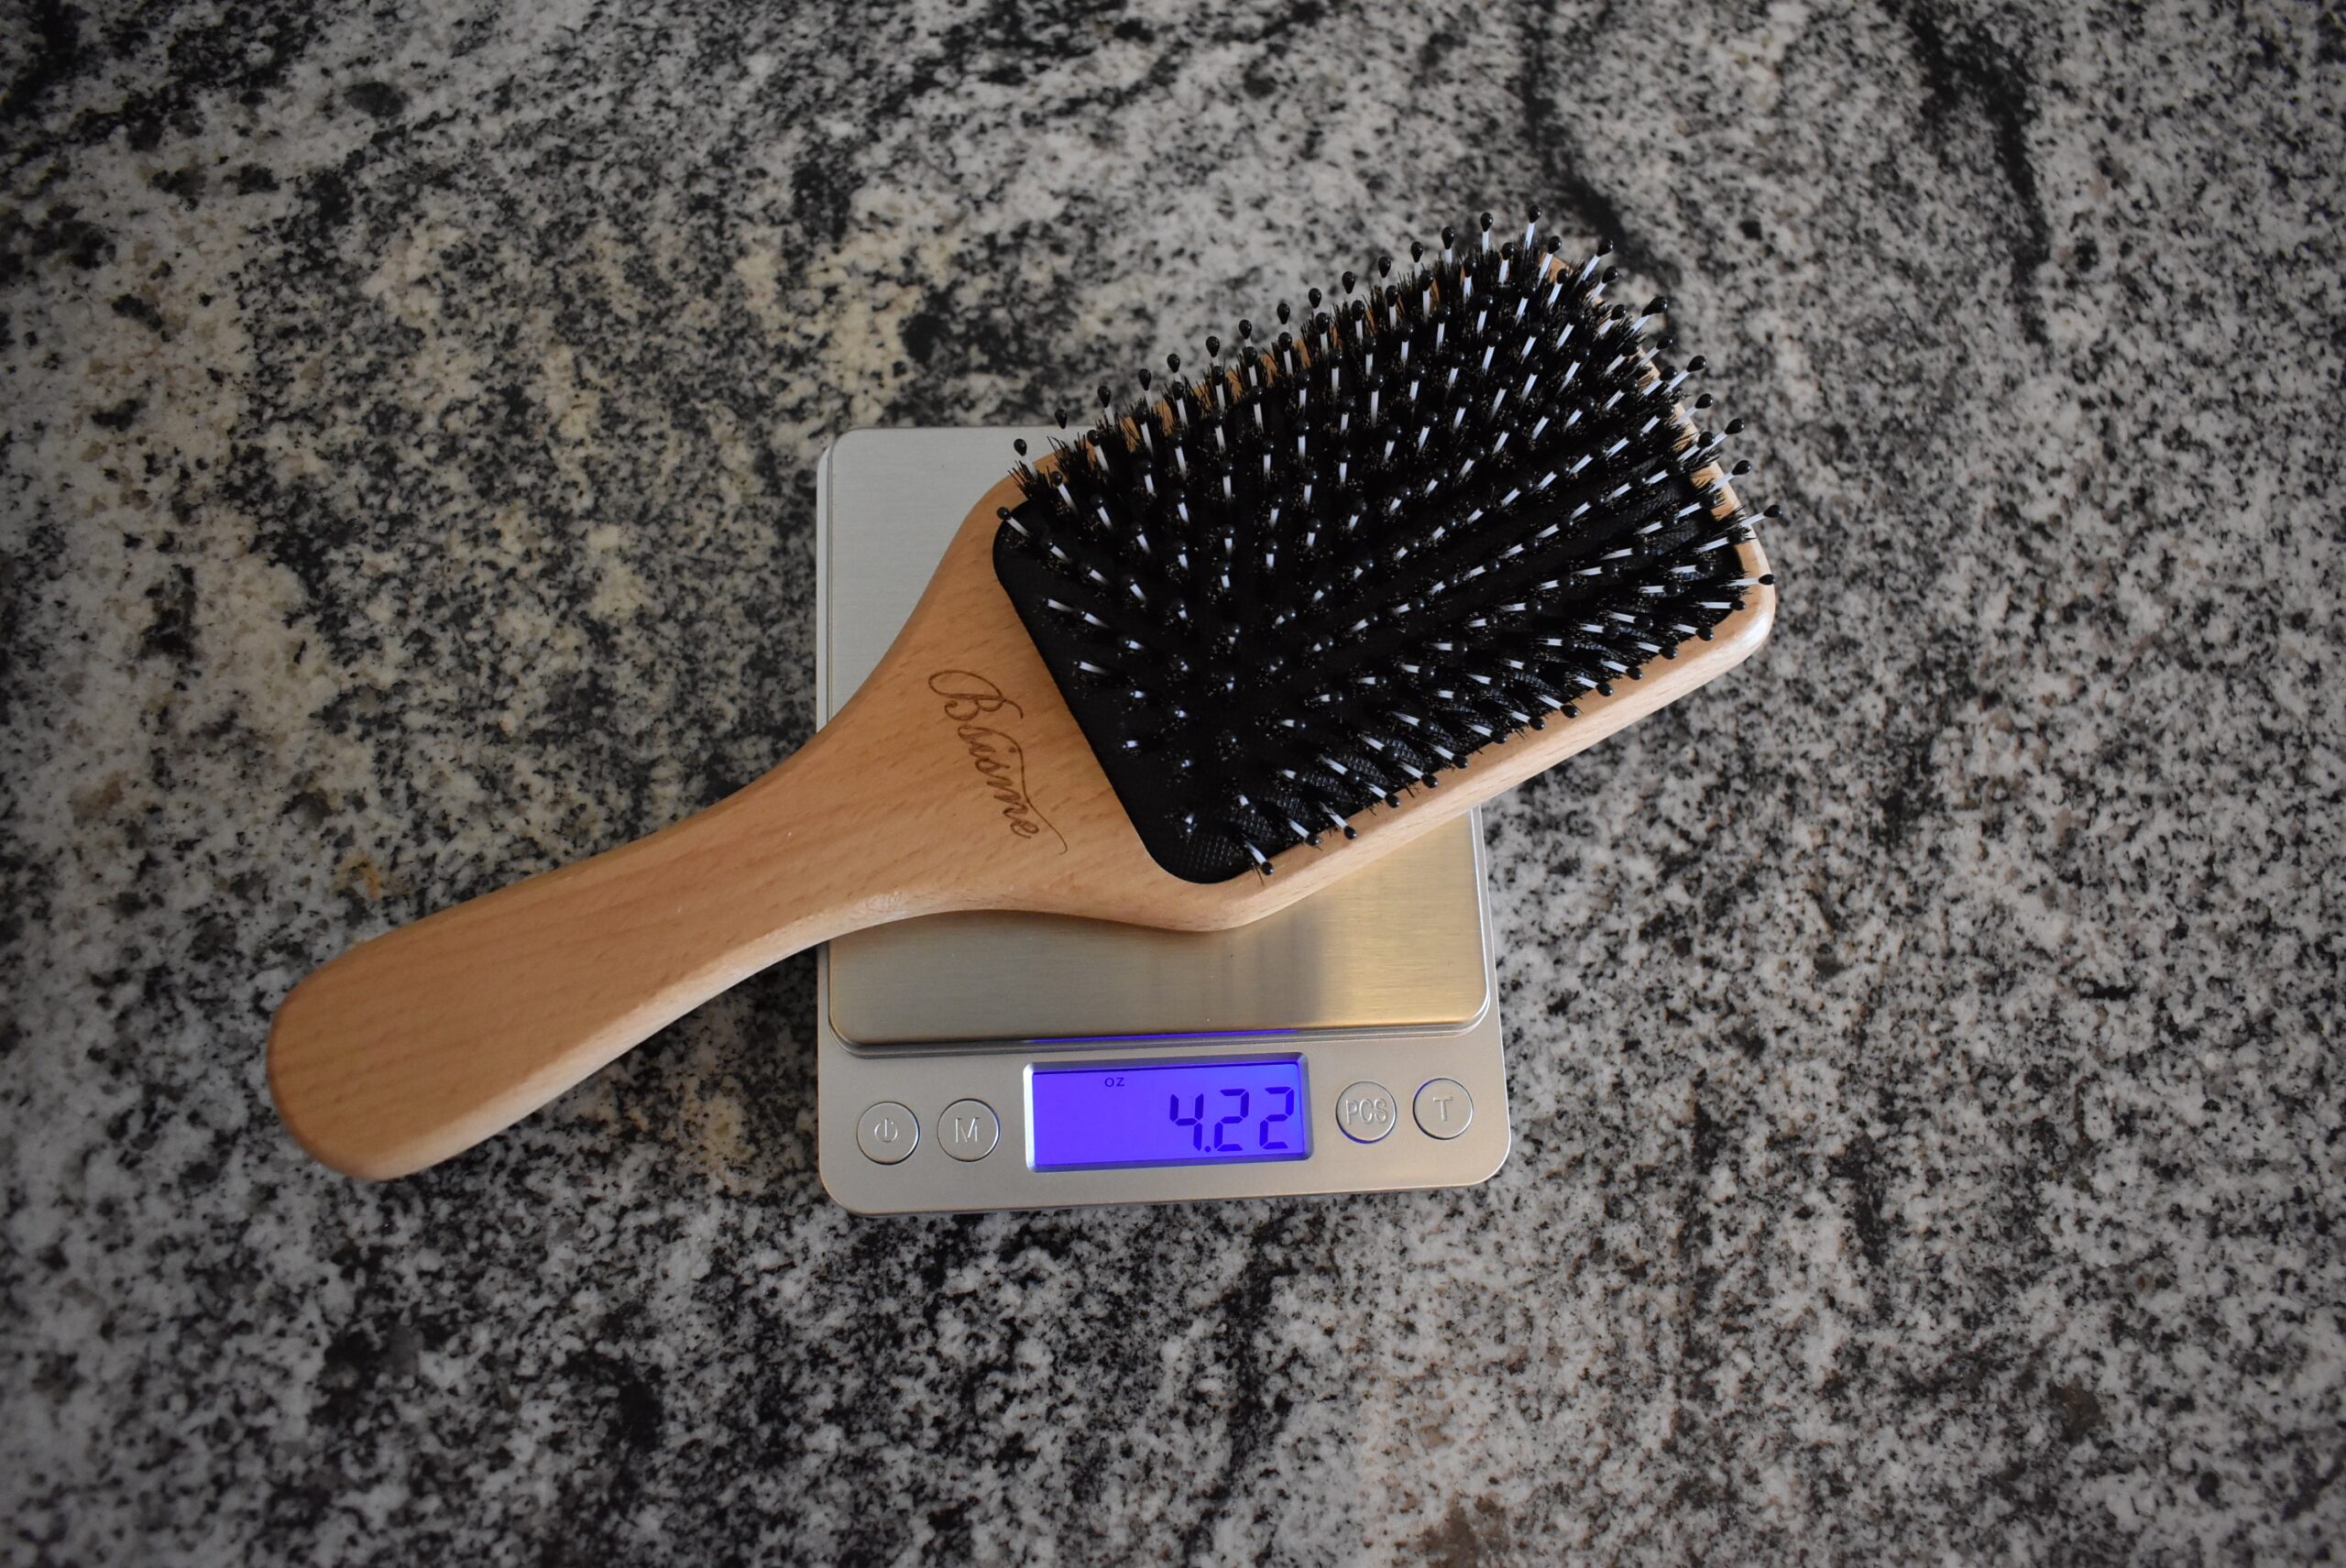 Bsisme Boar Bristle and Nylon Paddle Hairbrush on a scale, registering 4.22 oz